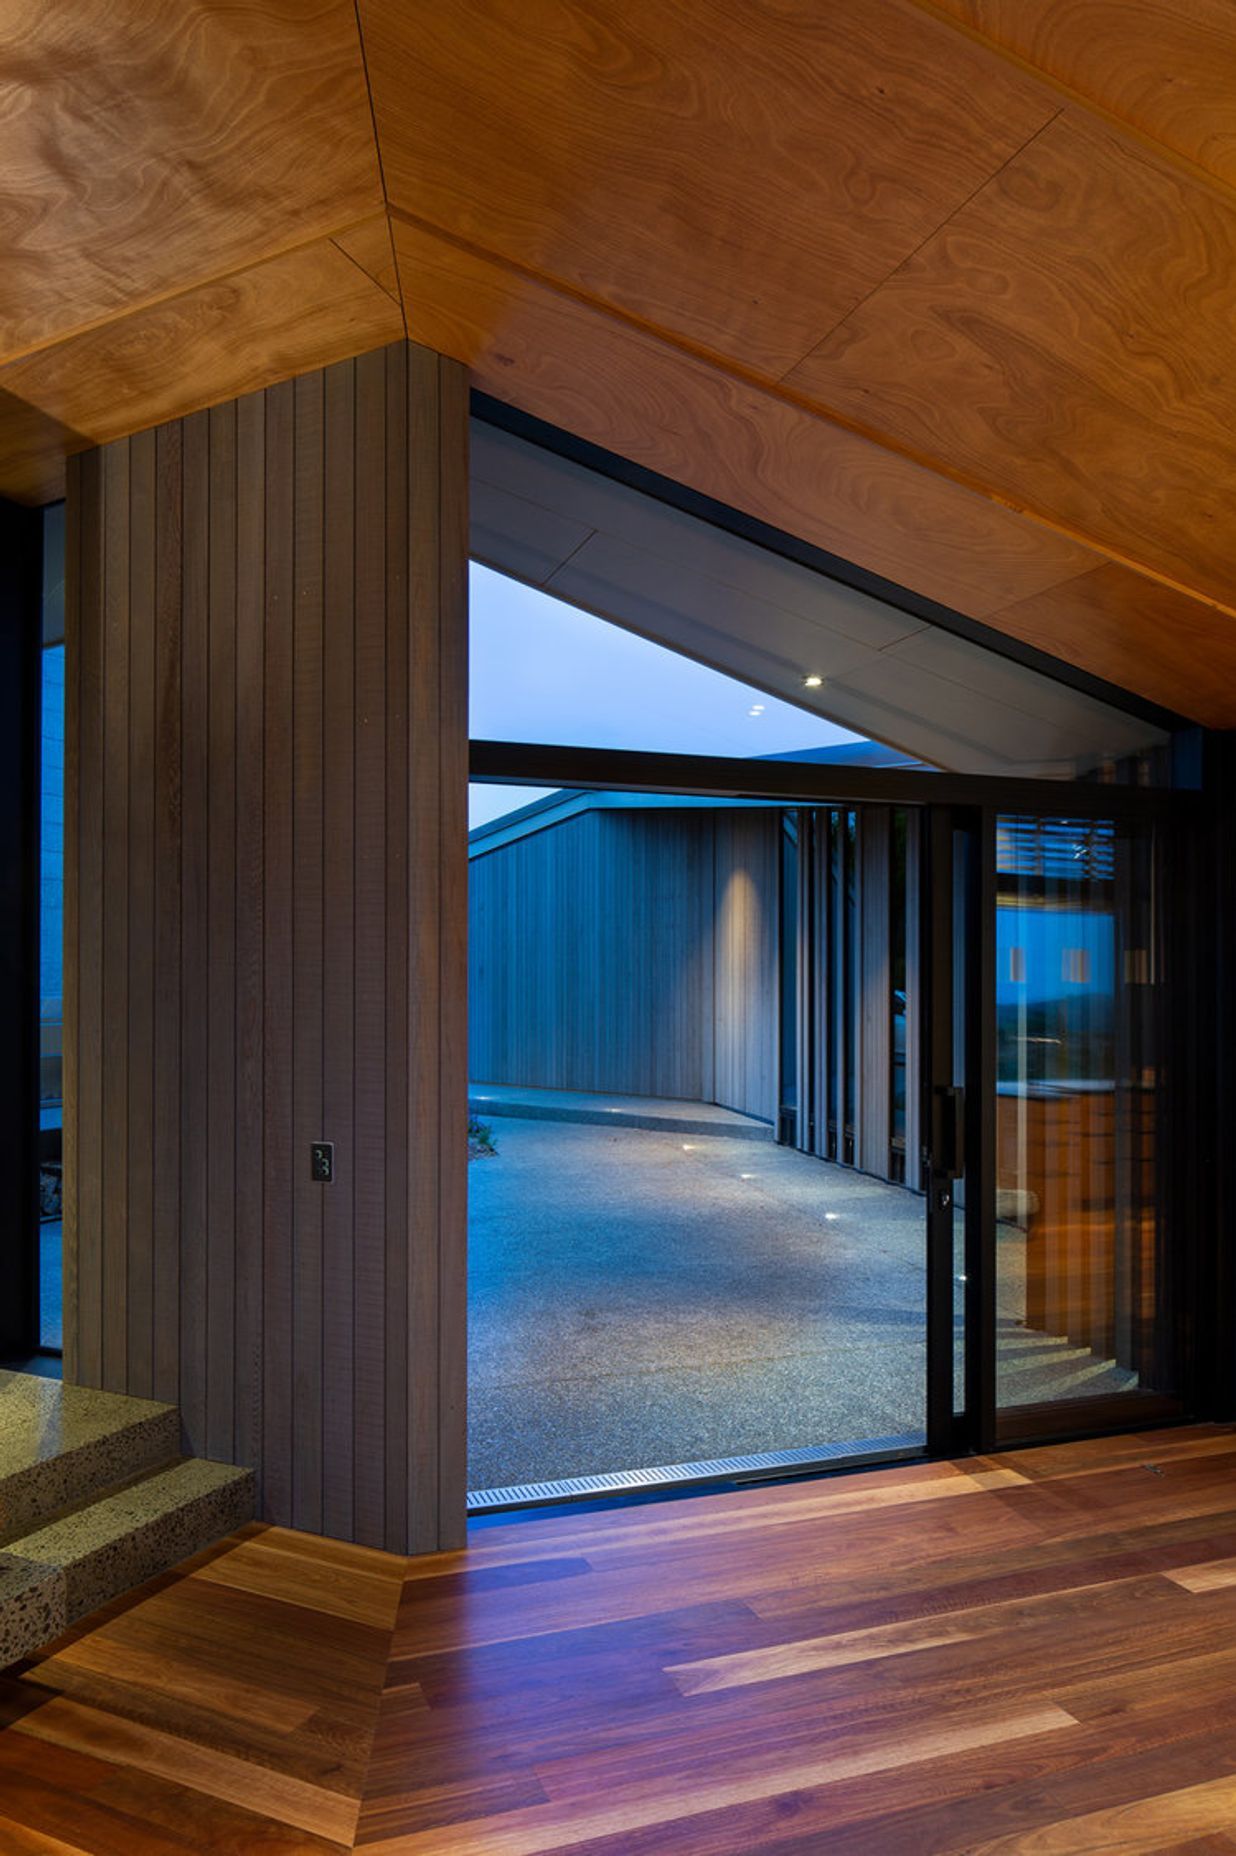 Okoume plywood ceiling and spotted gum timber flooring add warmth to the interior.